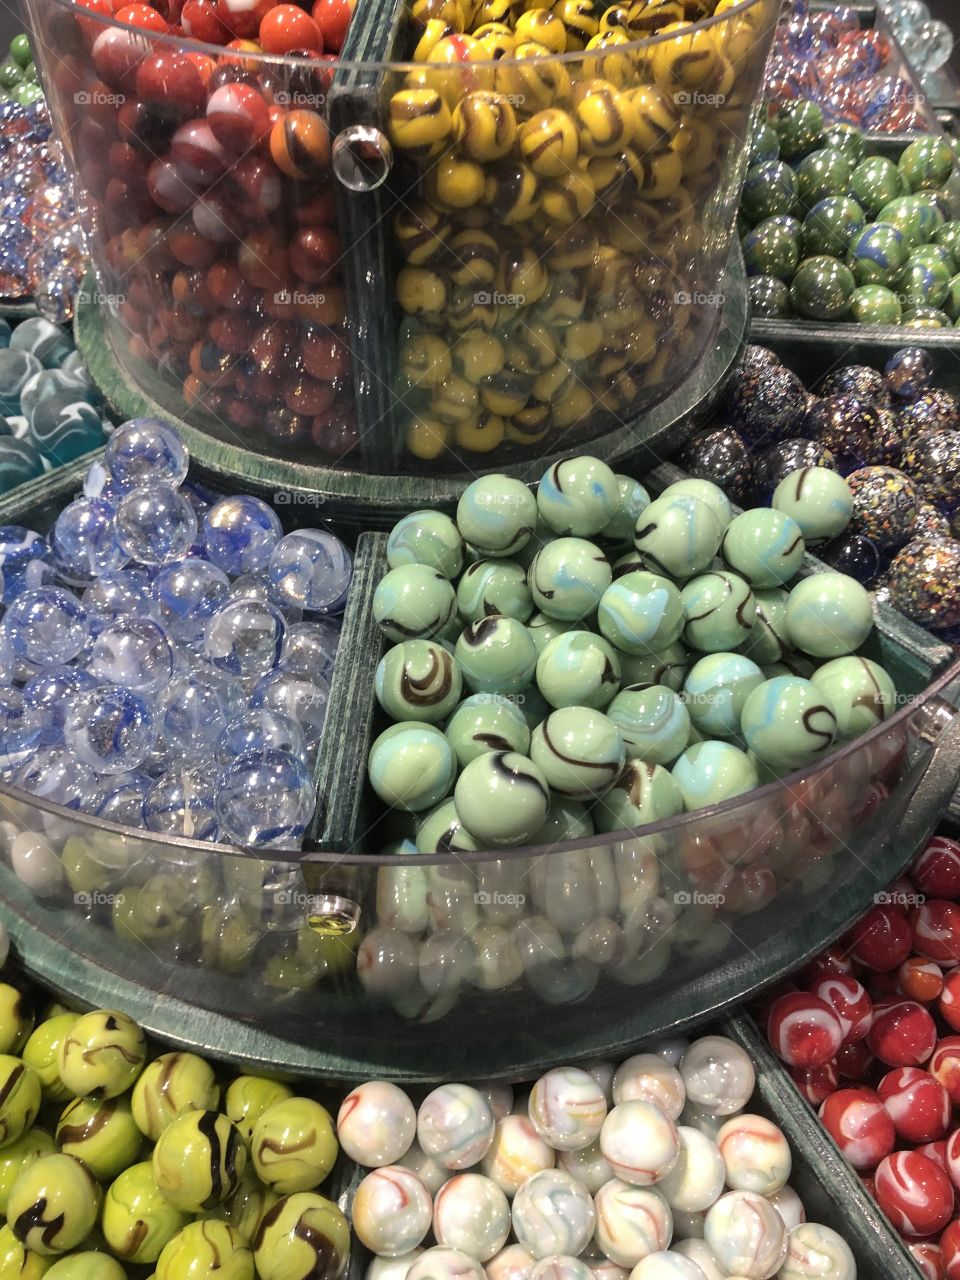 A visit to this establishment would not be complete without being able to view thousands of most precious and colorful marbles.